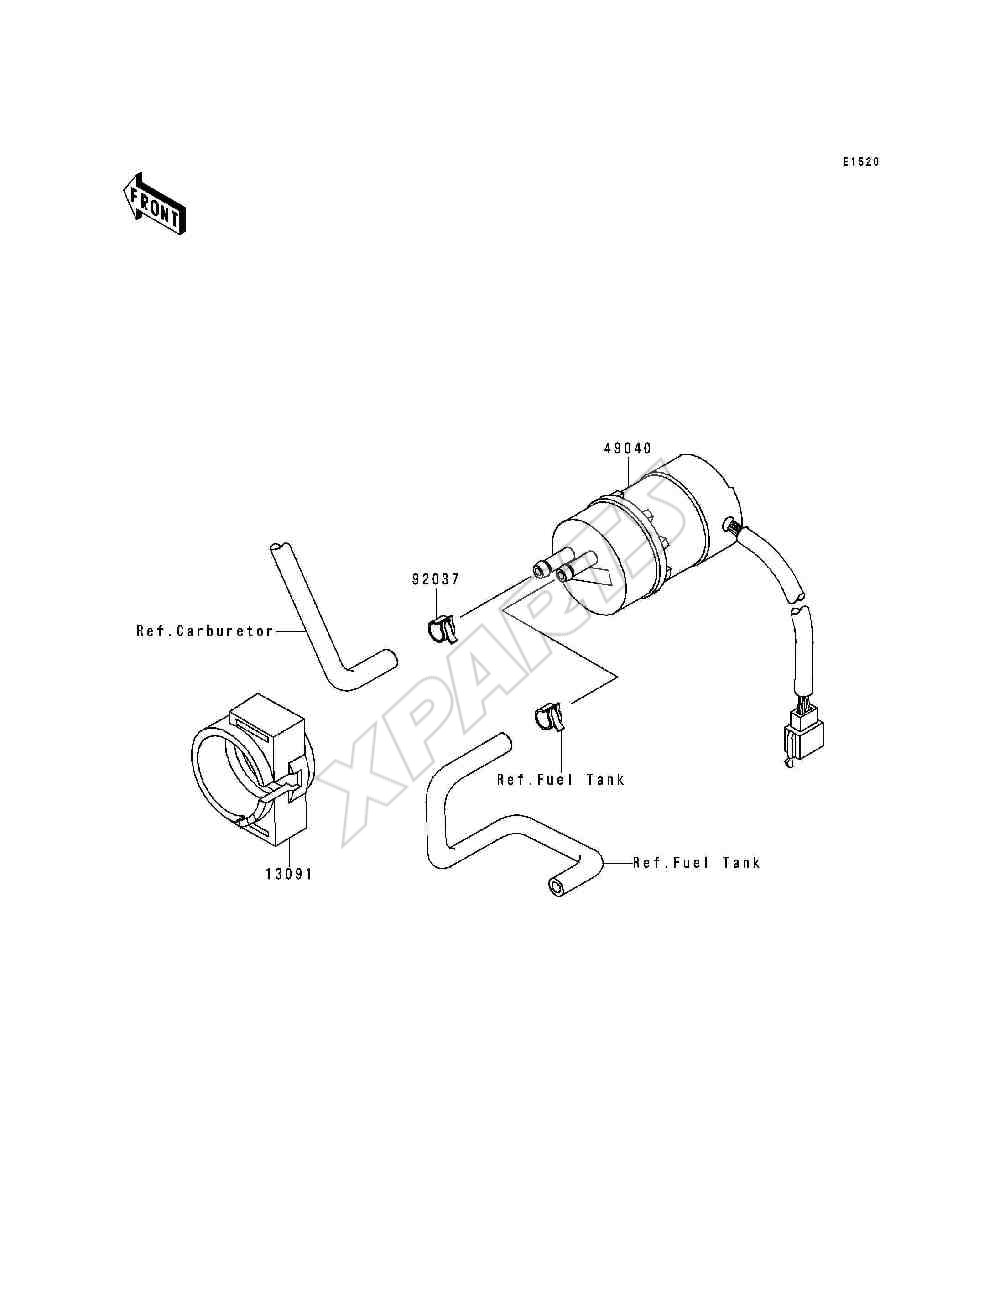 Picture for category Fuel Pump